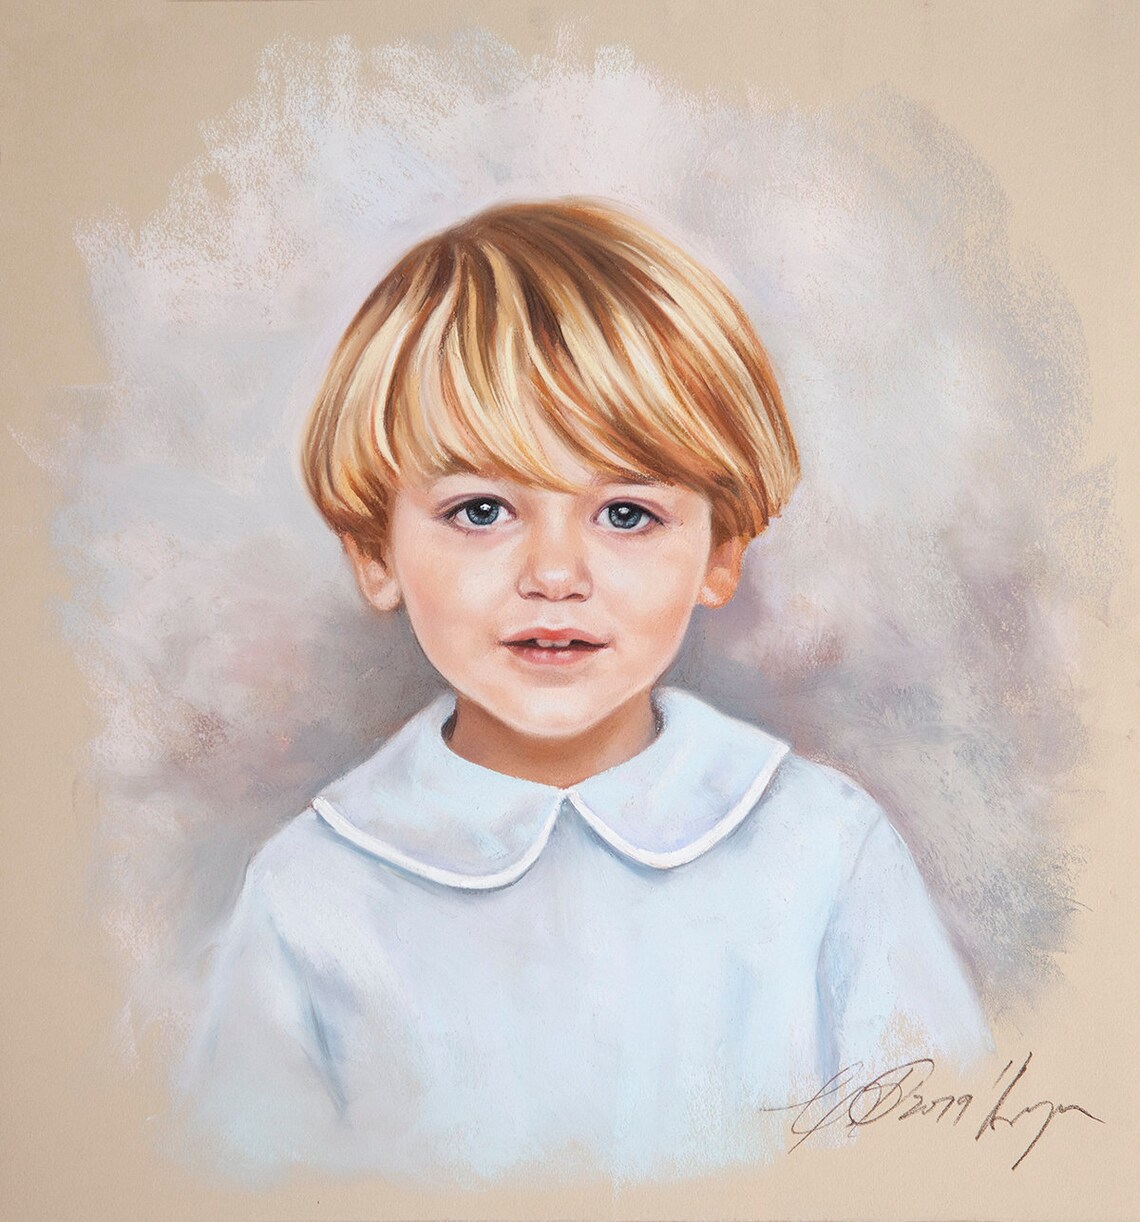 This is a Pastel Portrait of a Nice Boy a Handmade Portrait - Etsy